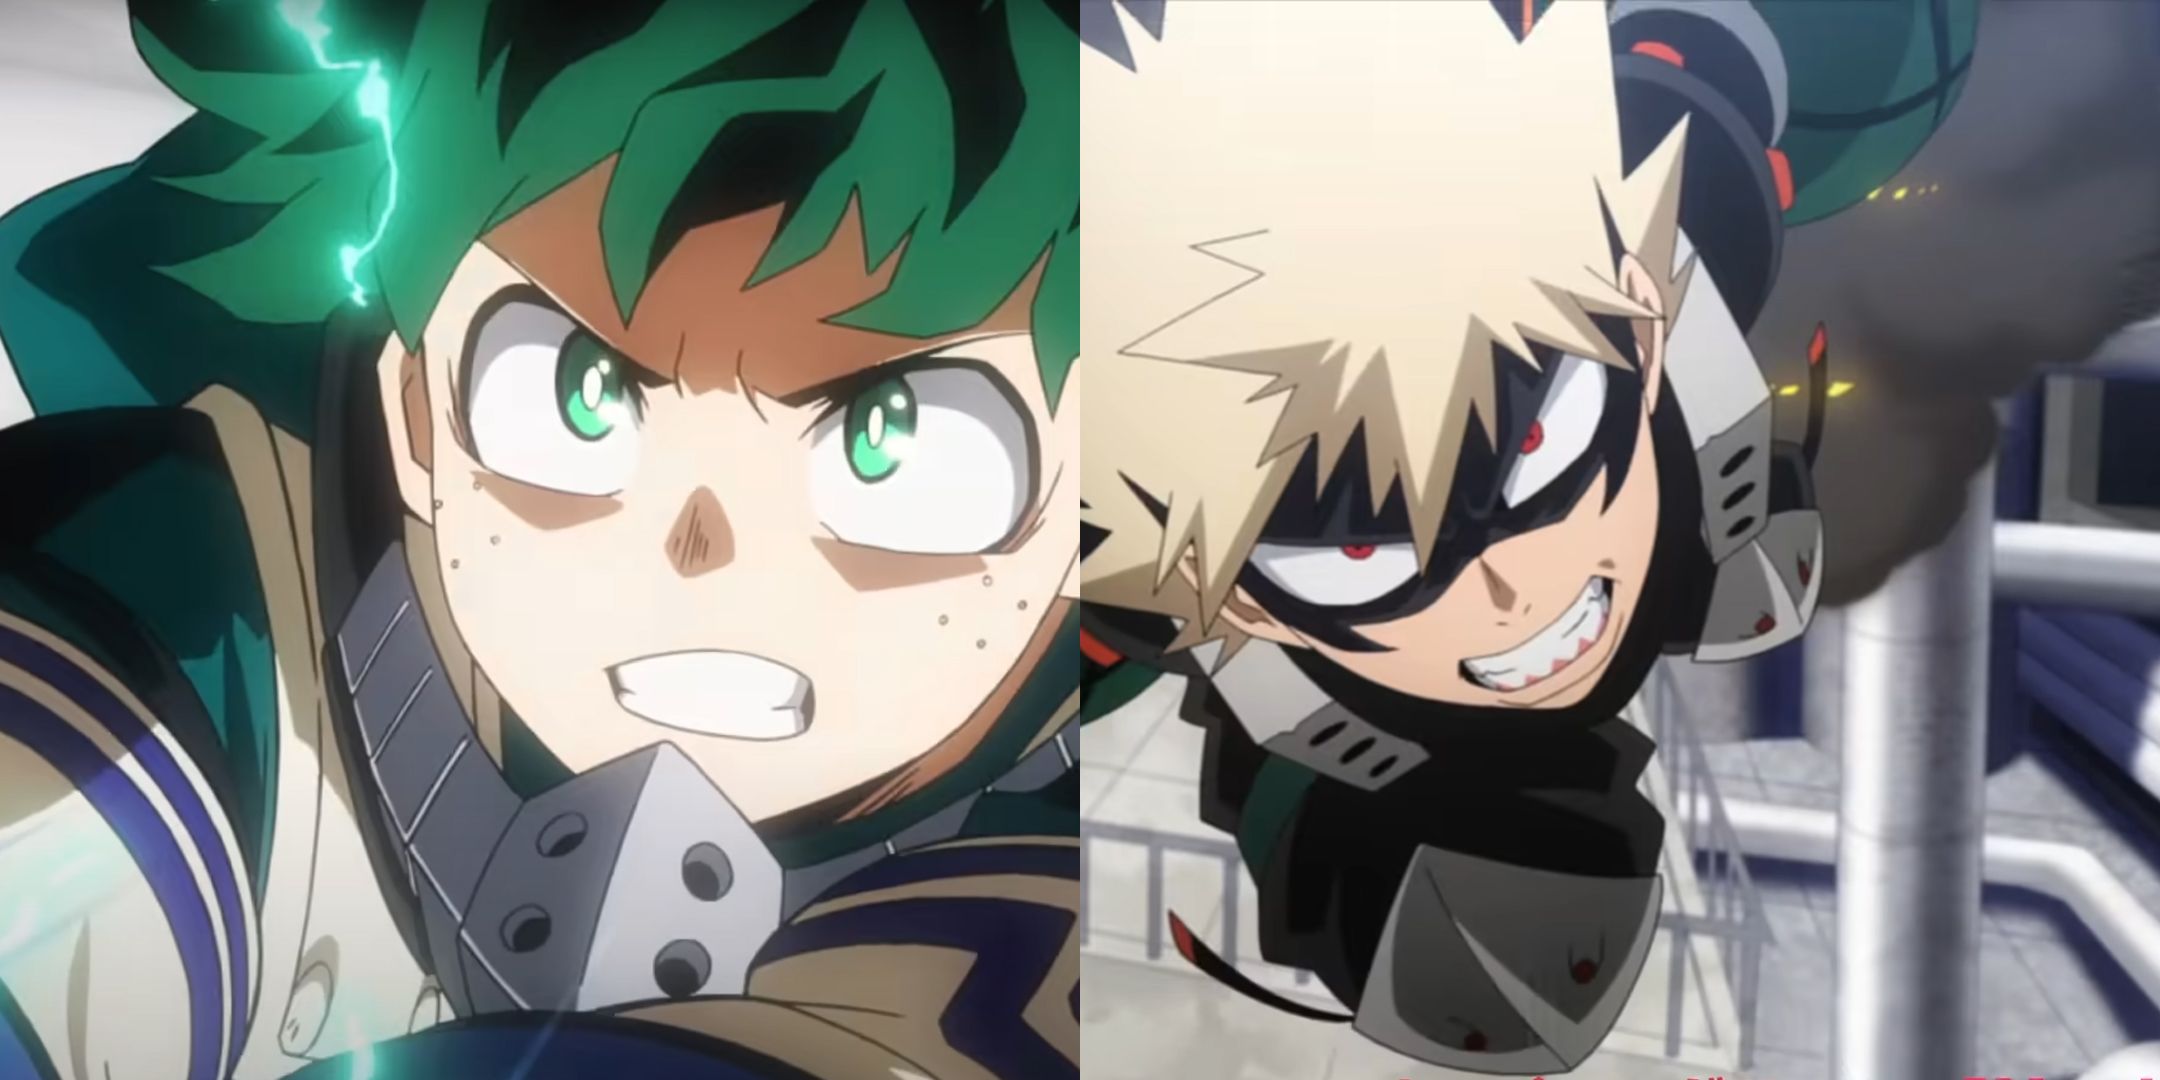 Deku and Bakugo being the inspirations of Class 1-A